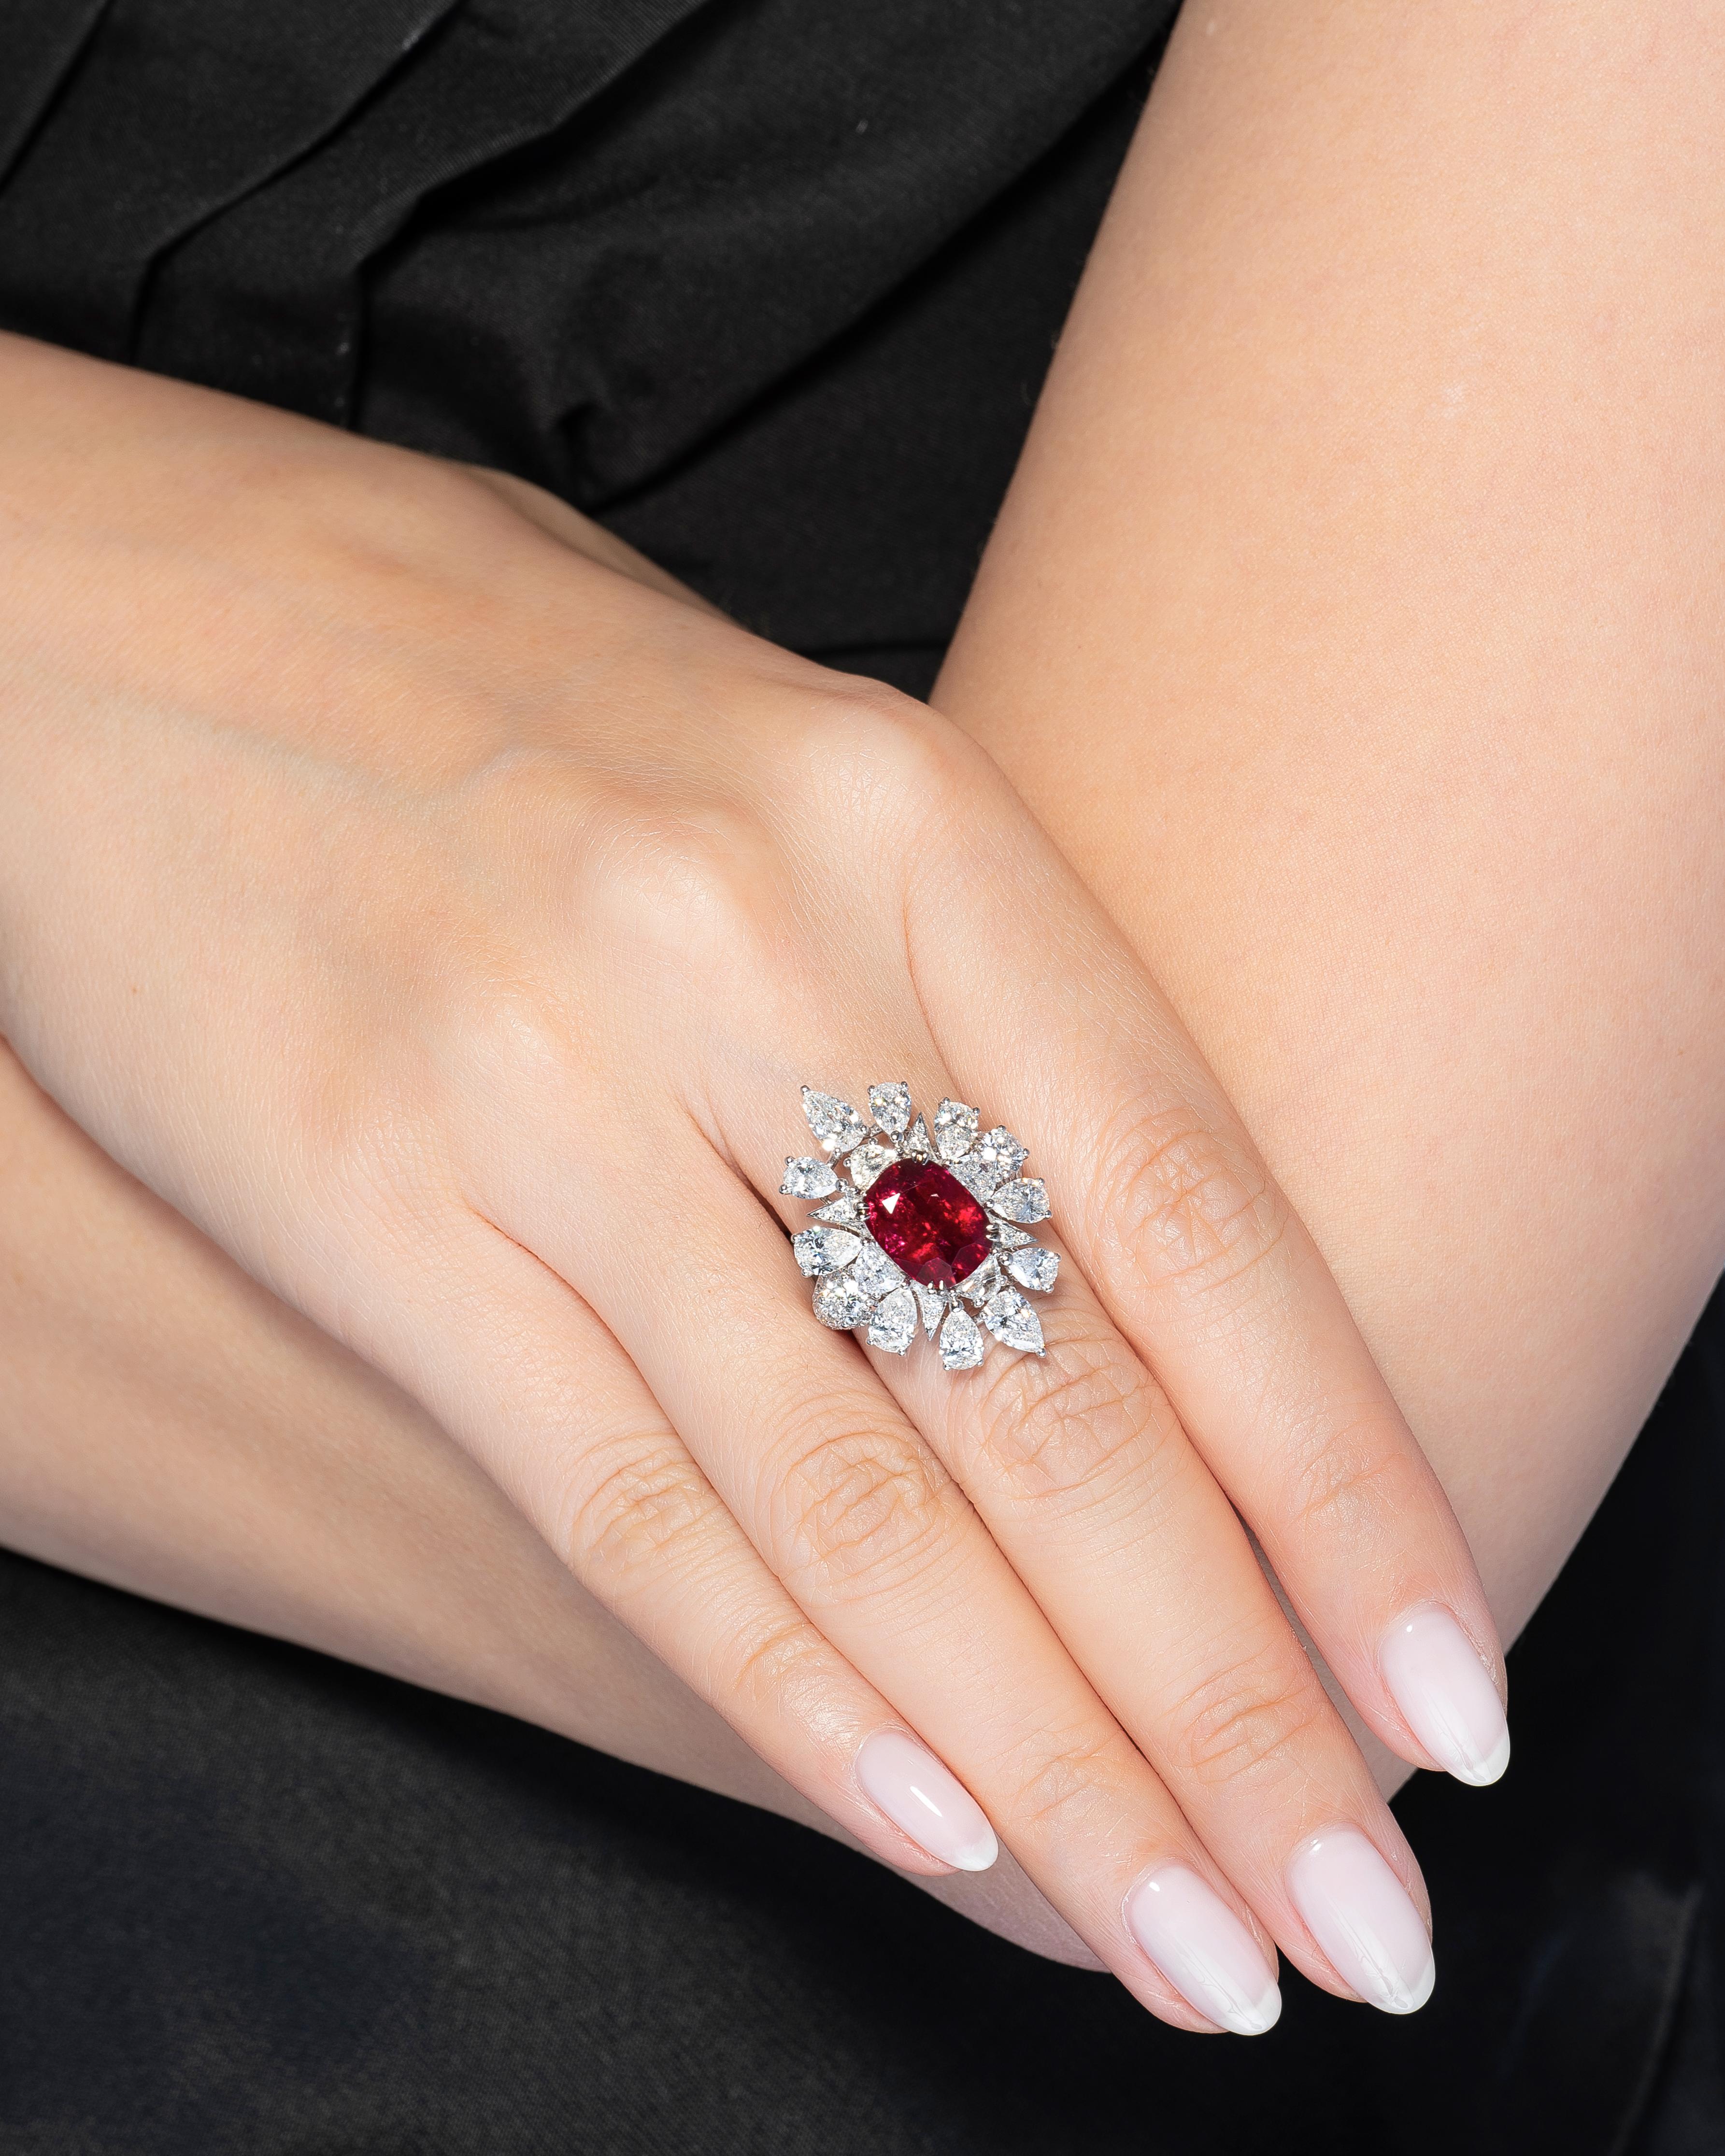 Vihari Jewels presents an enchanting 4.19 carat No-Heat Burmese Pigeon's Blood Ruby in an oval cut shape, surrounded by diamonds and set in Platinum. GRS certifies (Report 2018-048649) that this ruby is of natural variety, hailing from Burma and